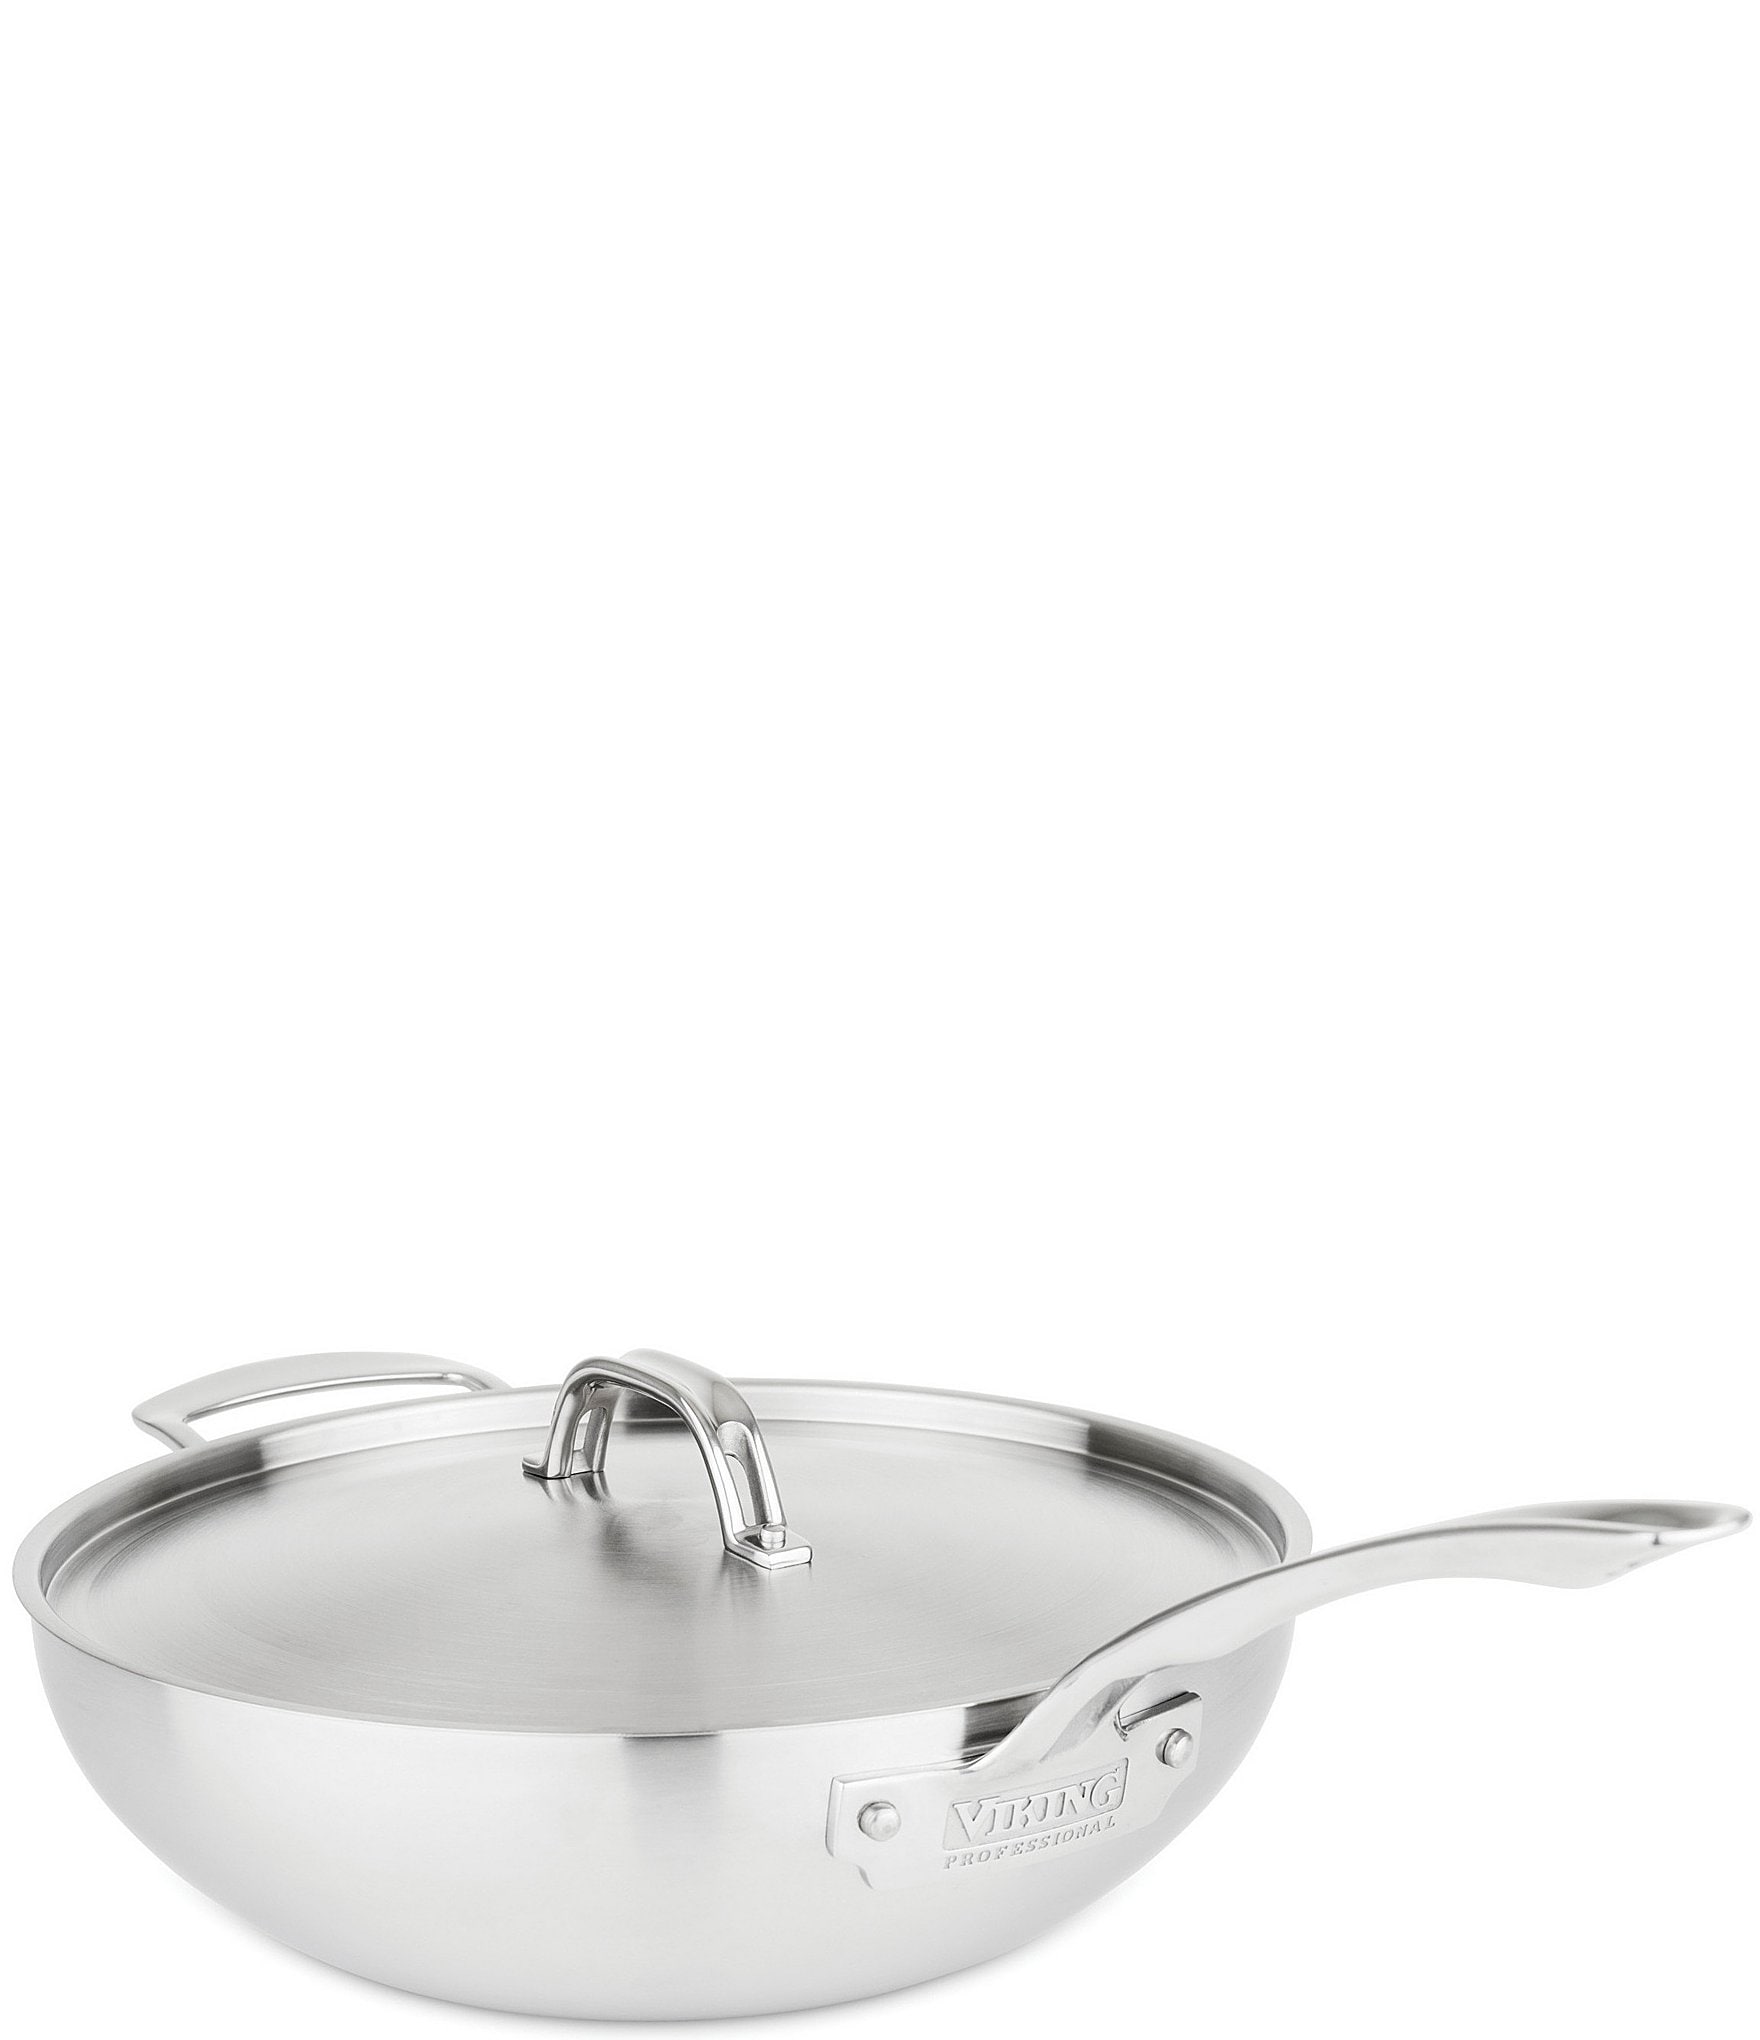 Viking - Professional 5-Ply 6.4-Quart Casserole Pan - Stainless Steel